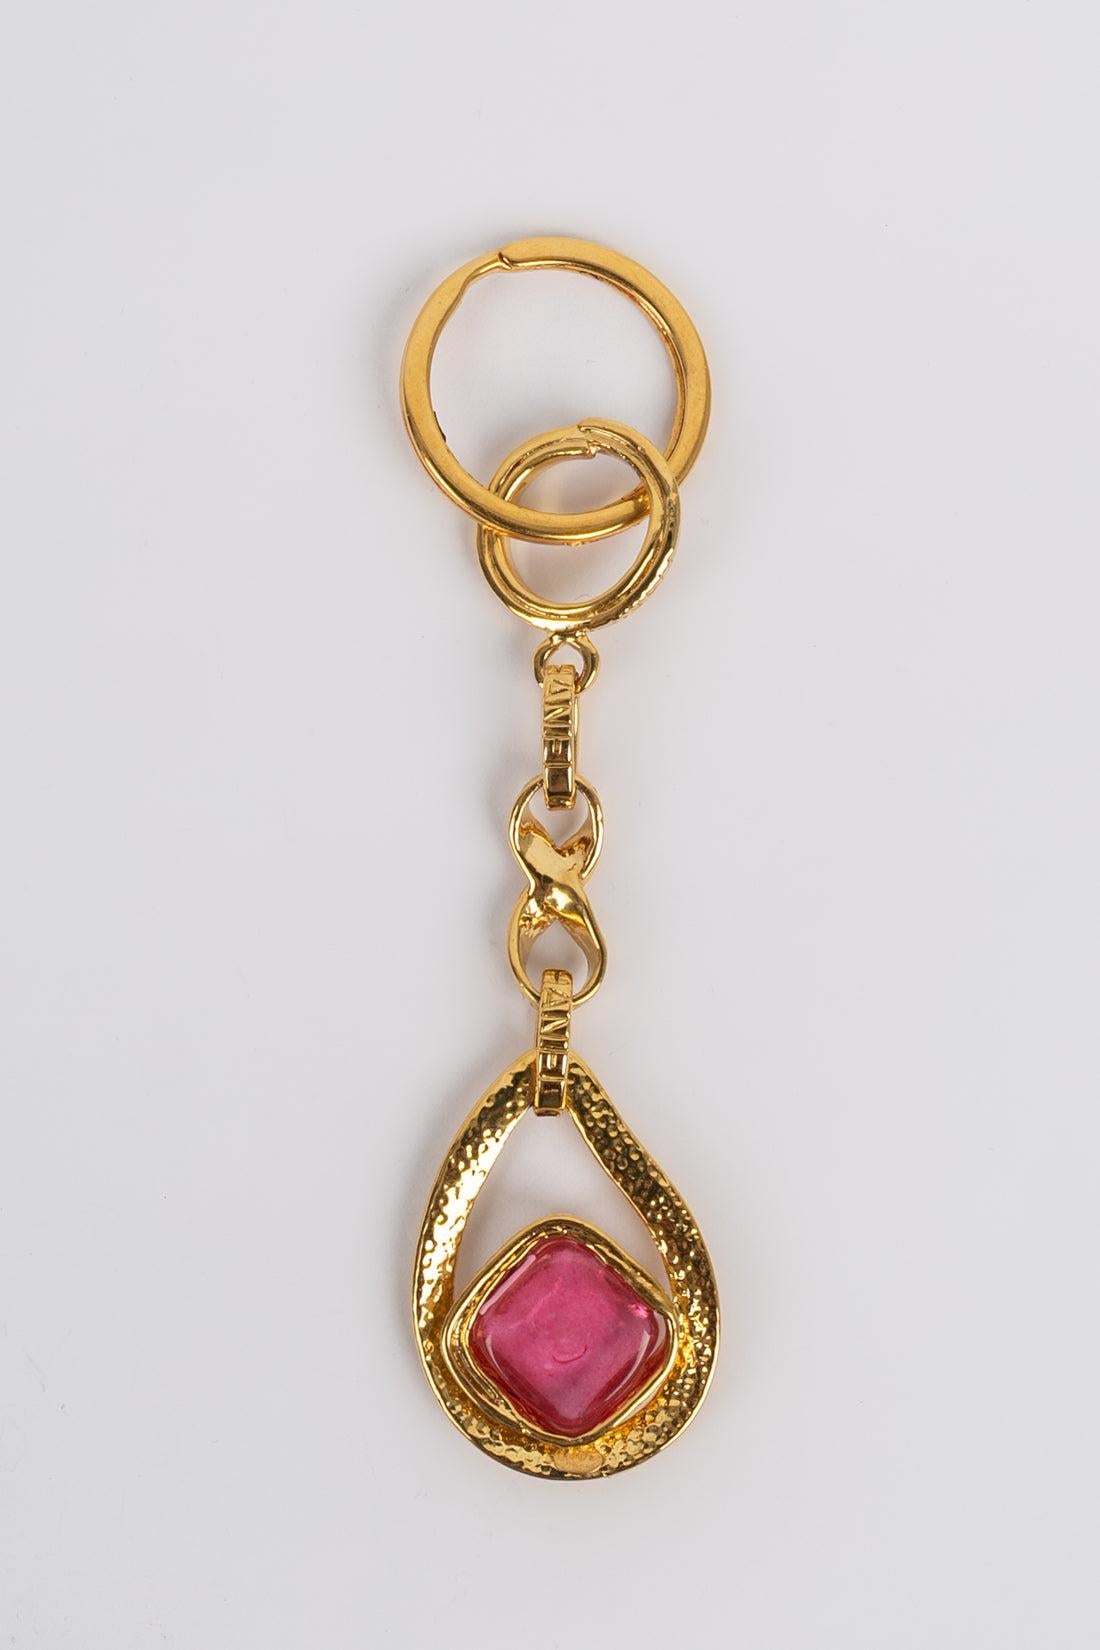 Chanel - (Made in France) Keychain in gilded metal and glass paste cabochons. Spring-Summer 1996 collection.

Additional information: 
Dimensions: Length: 12.3 cm
Condition: Very good condition
Seller Ref number: BARB10